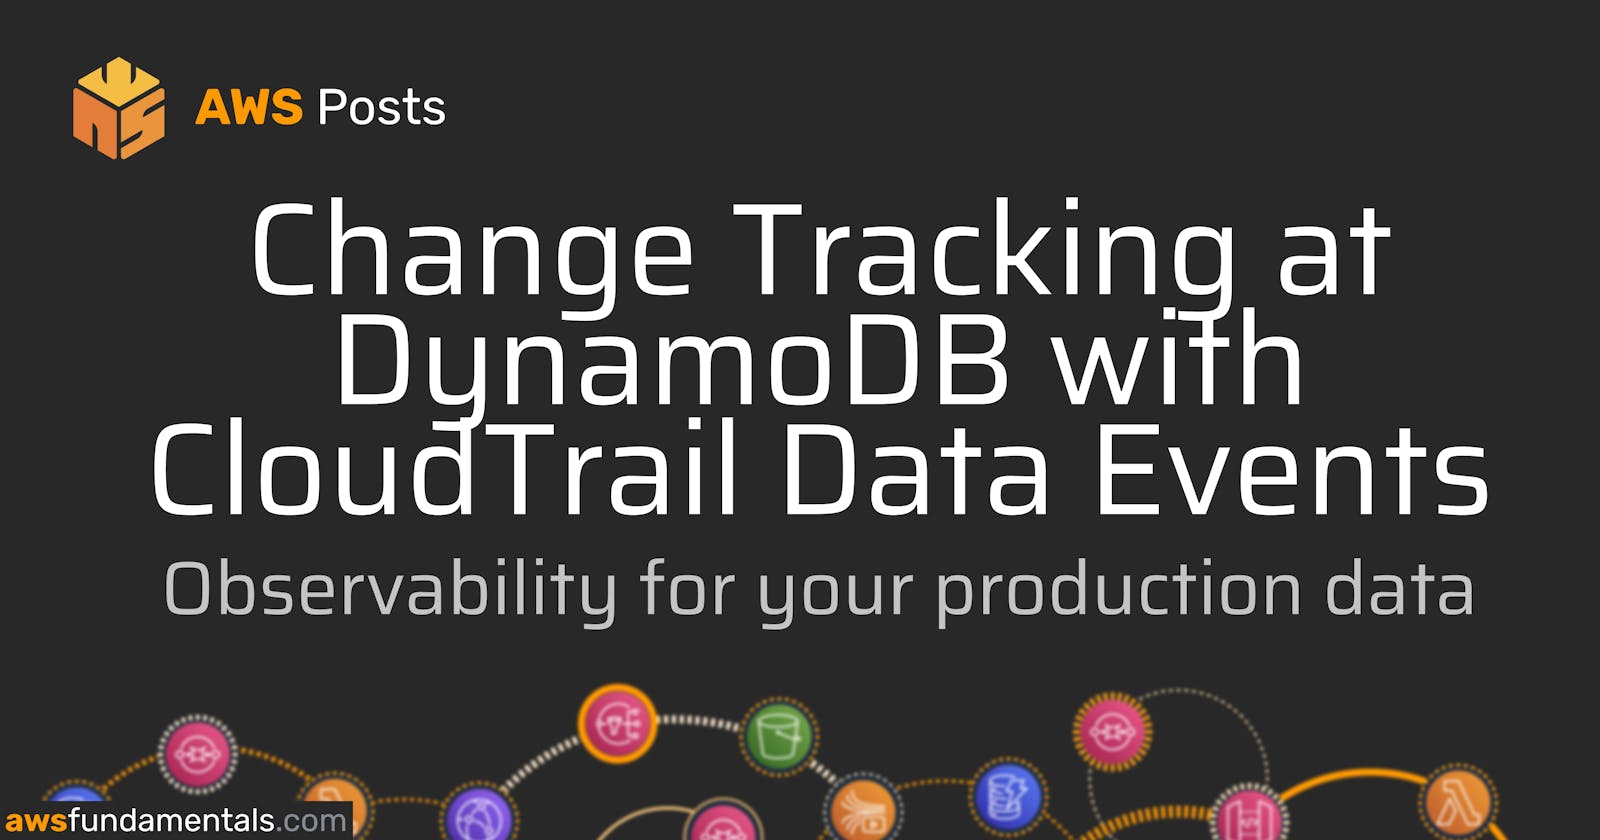 Change Tracking at DynamoDB with CloudTrail Data Events